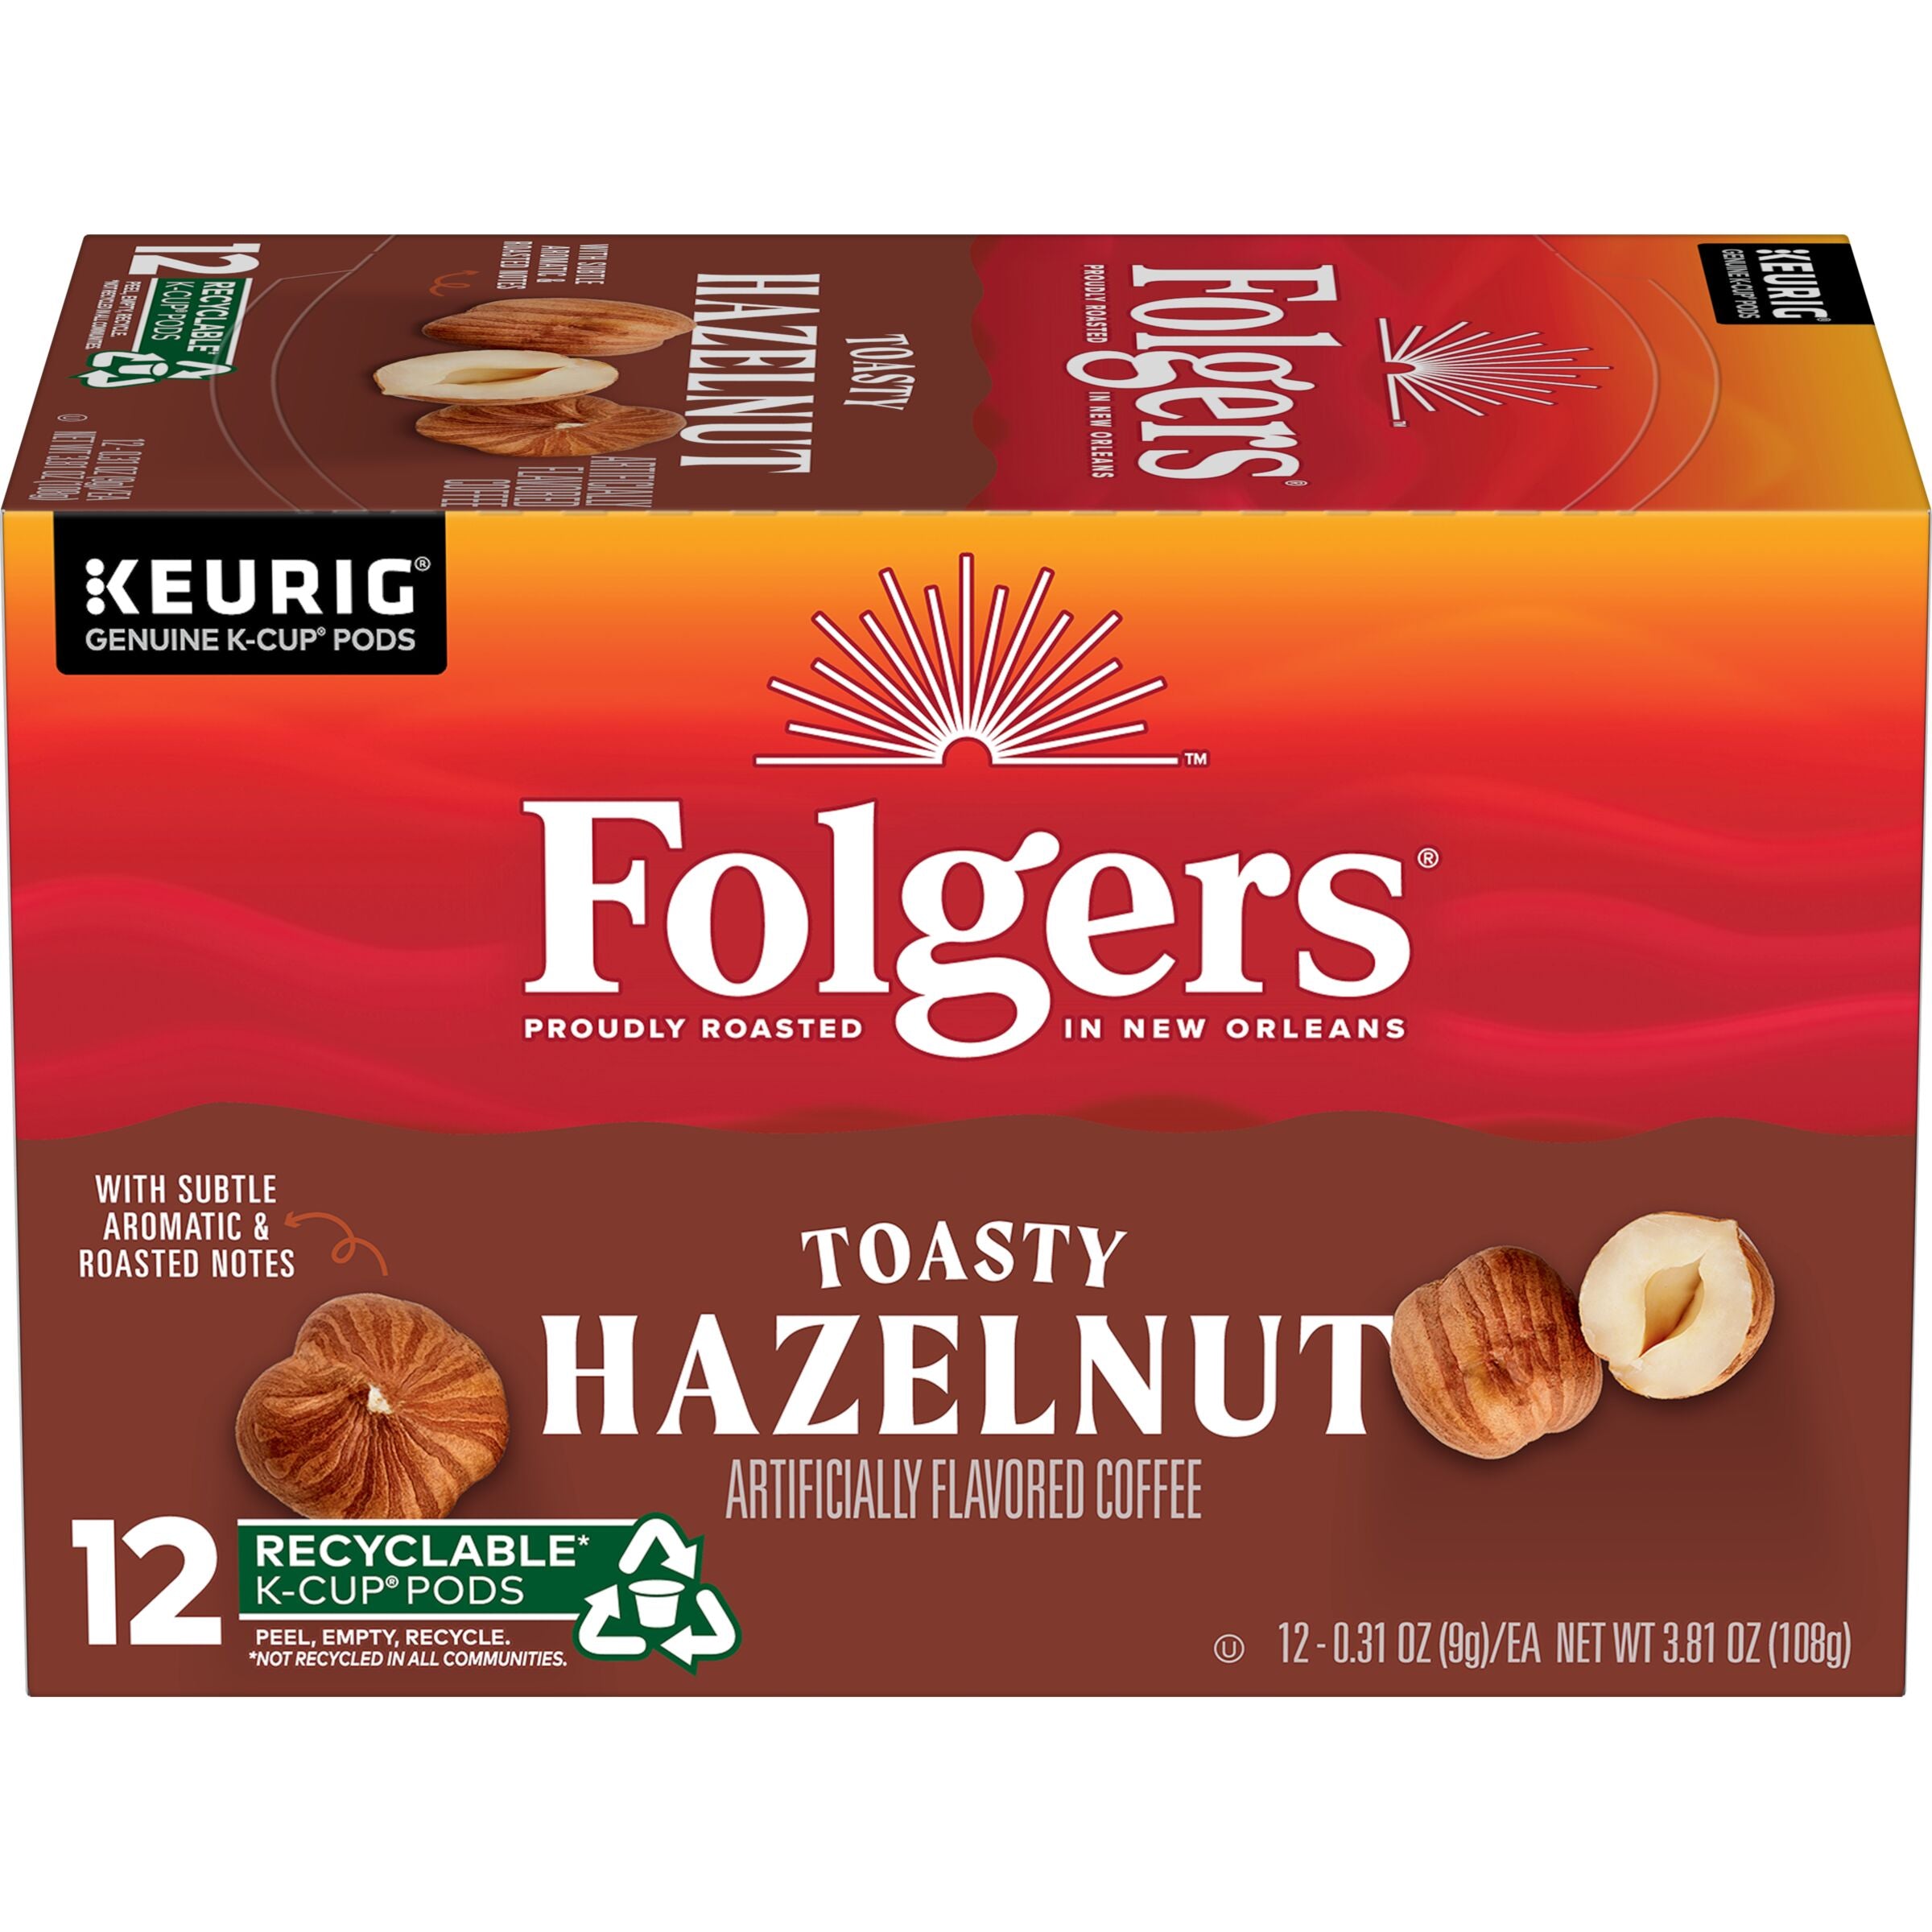 Folgers Toasty Hazelnut Flavored Coffee, K-Cup Pods